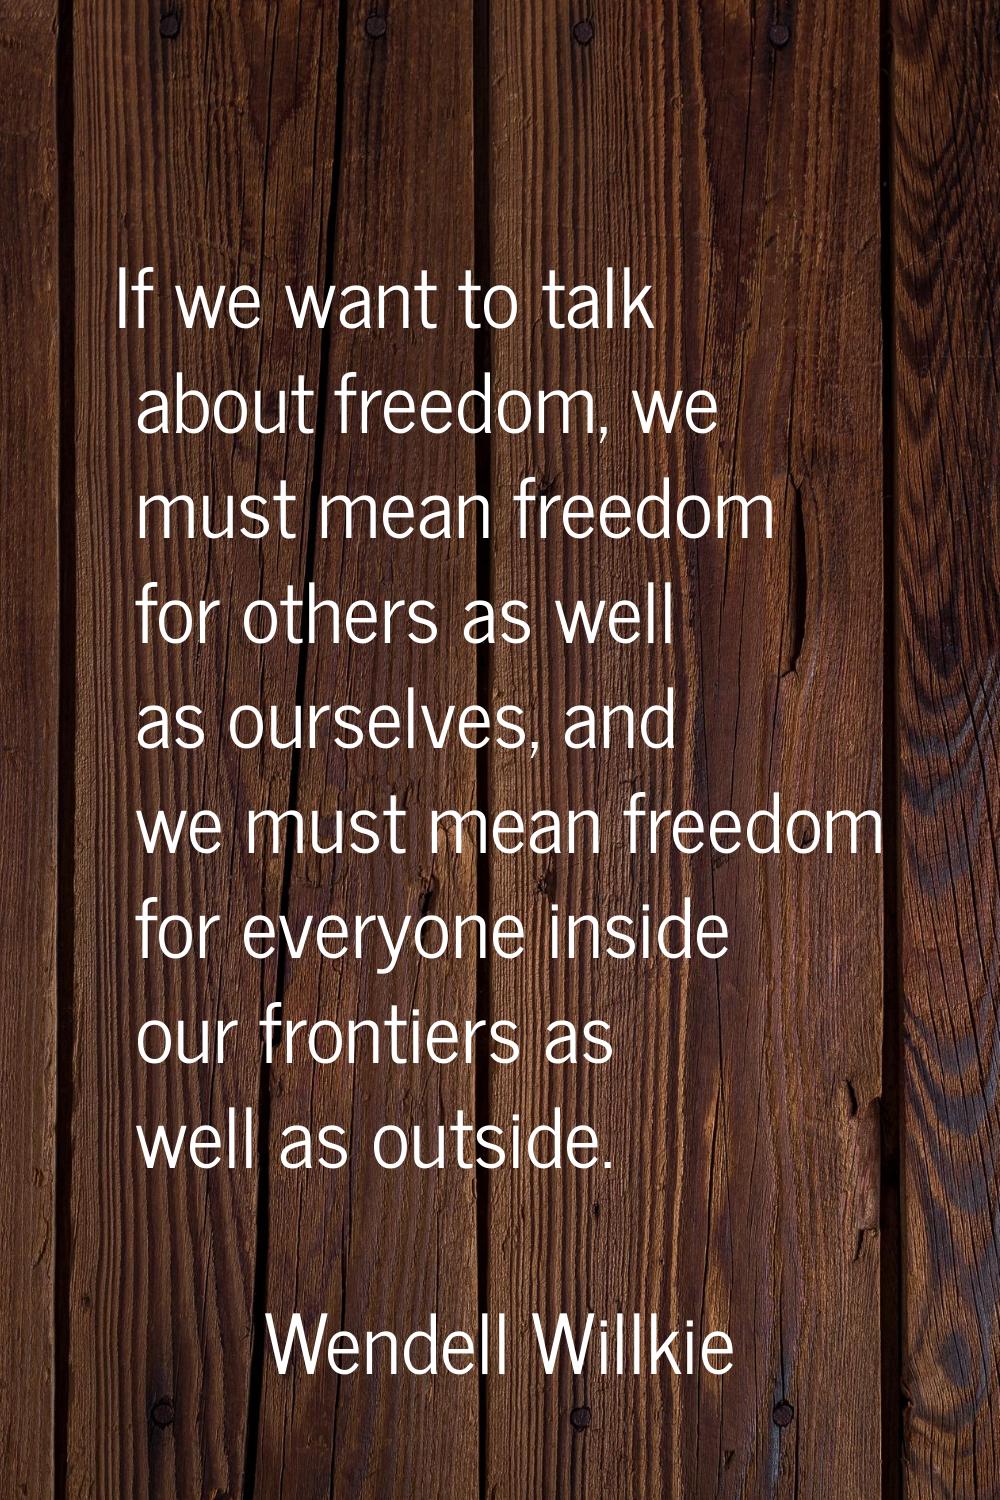 If we want to talk about freedom, we must mean freedom for others as well as ourselves, and we must